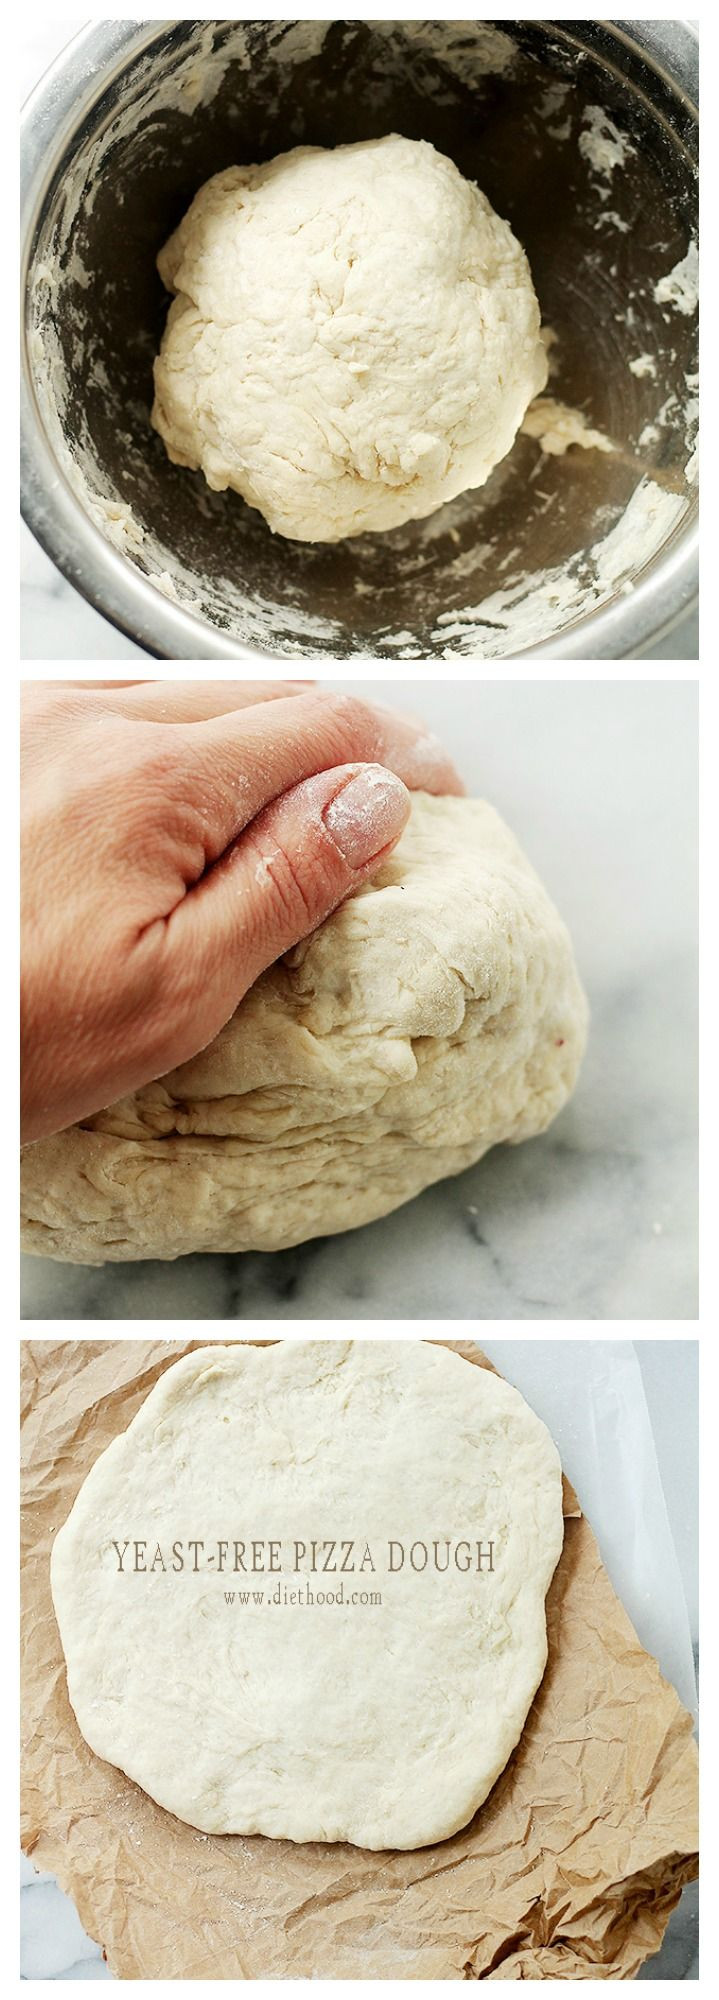 Pizza Dough Recipe With Yeast
 Yeast Free Pizza Dough